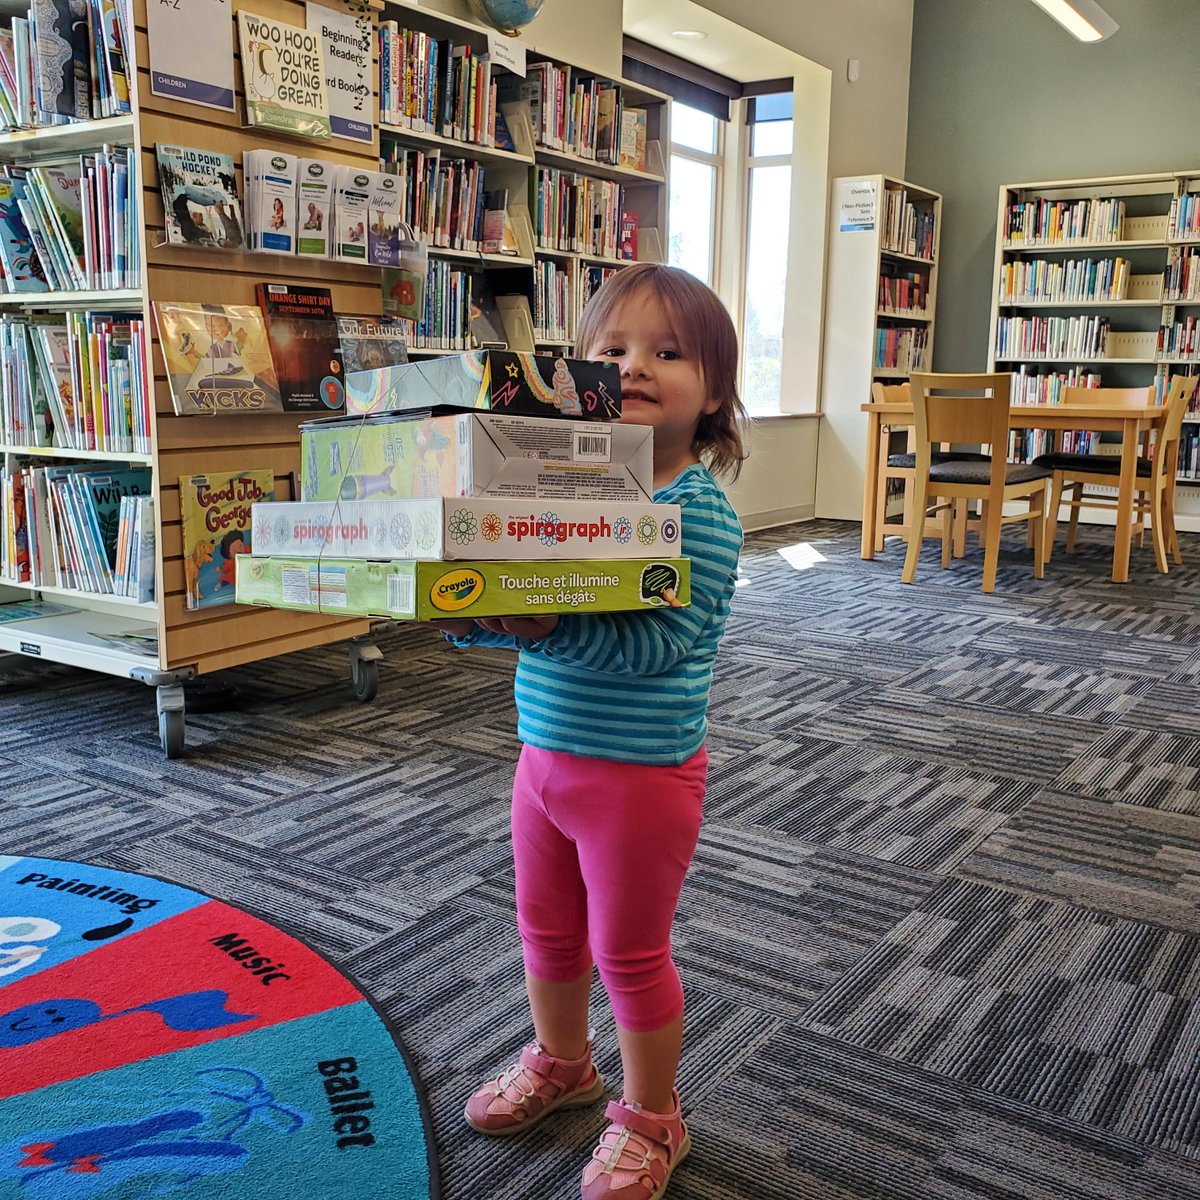 Today, we're celebrating Katana, our Cache Creek Read to Me Summer Reading Club winner! 😊👏

CONGRATULATIONS, Katana! Great job this summer, and enjoy your prize! 🎉

#feelgoodfriday #summerreading #readinglove #BCSRC #tnrl #tnrlibrary #CacheCreek